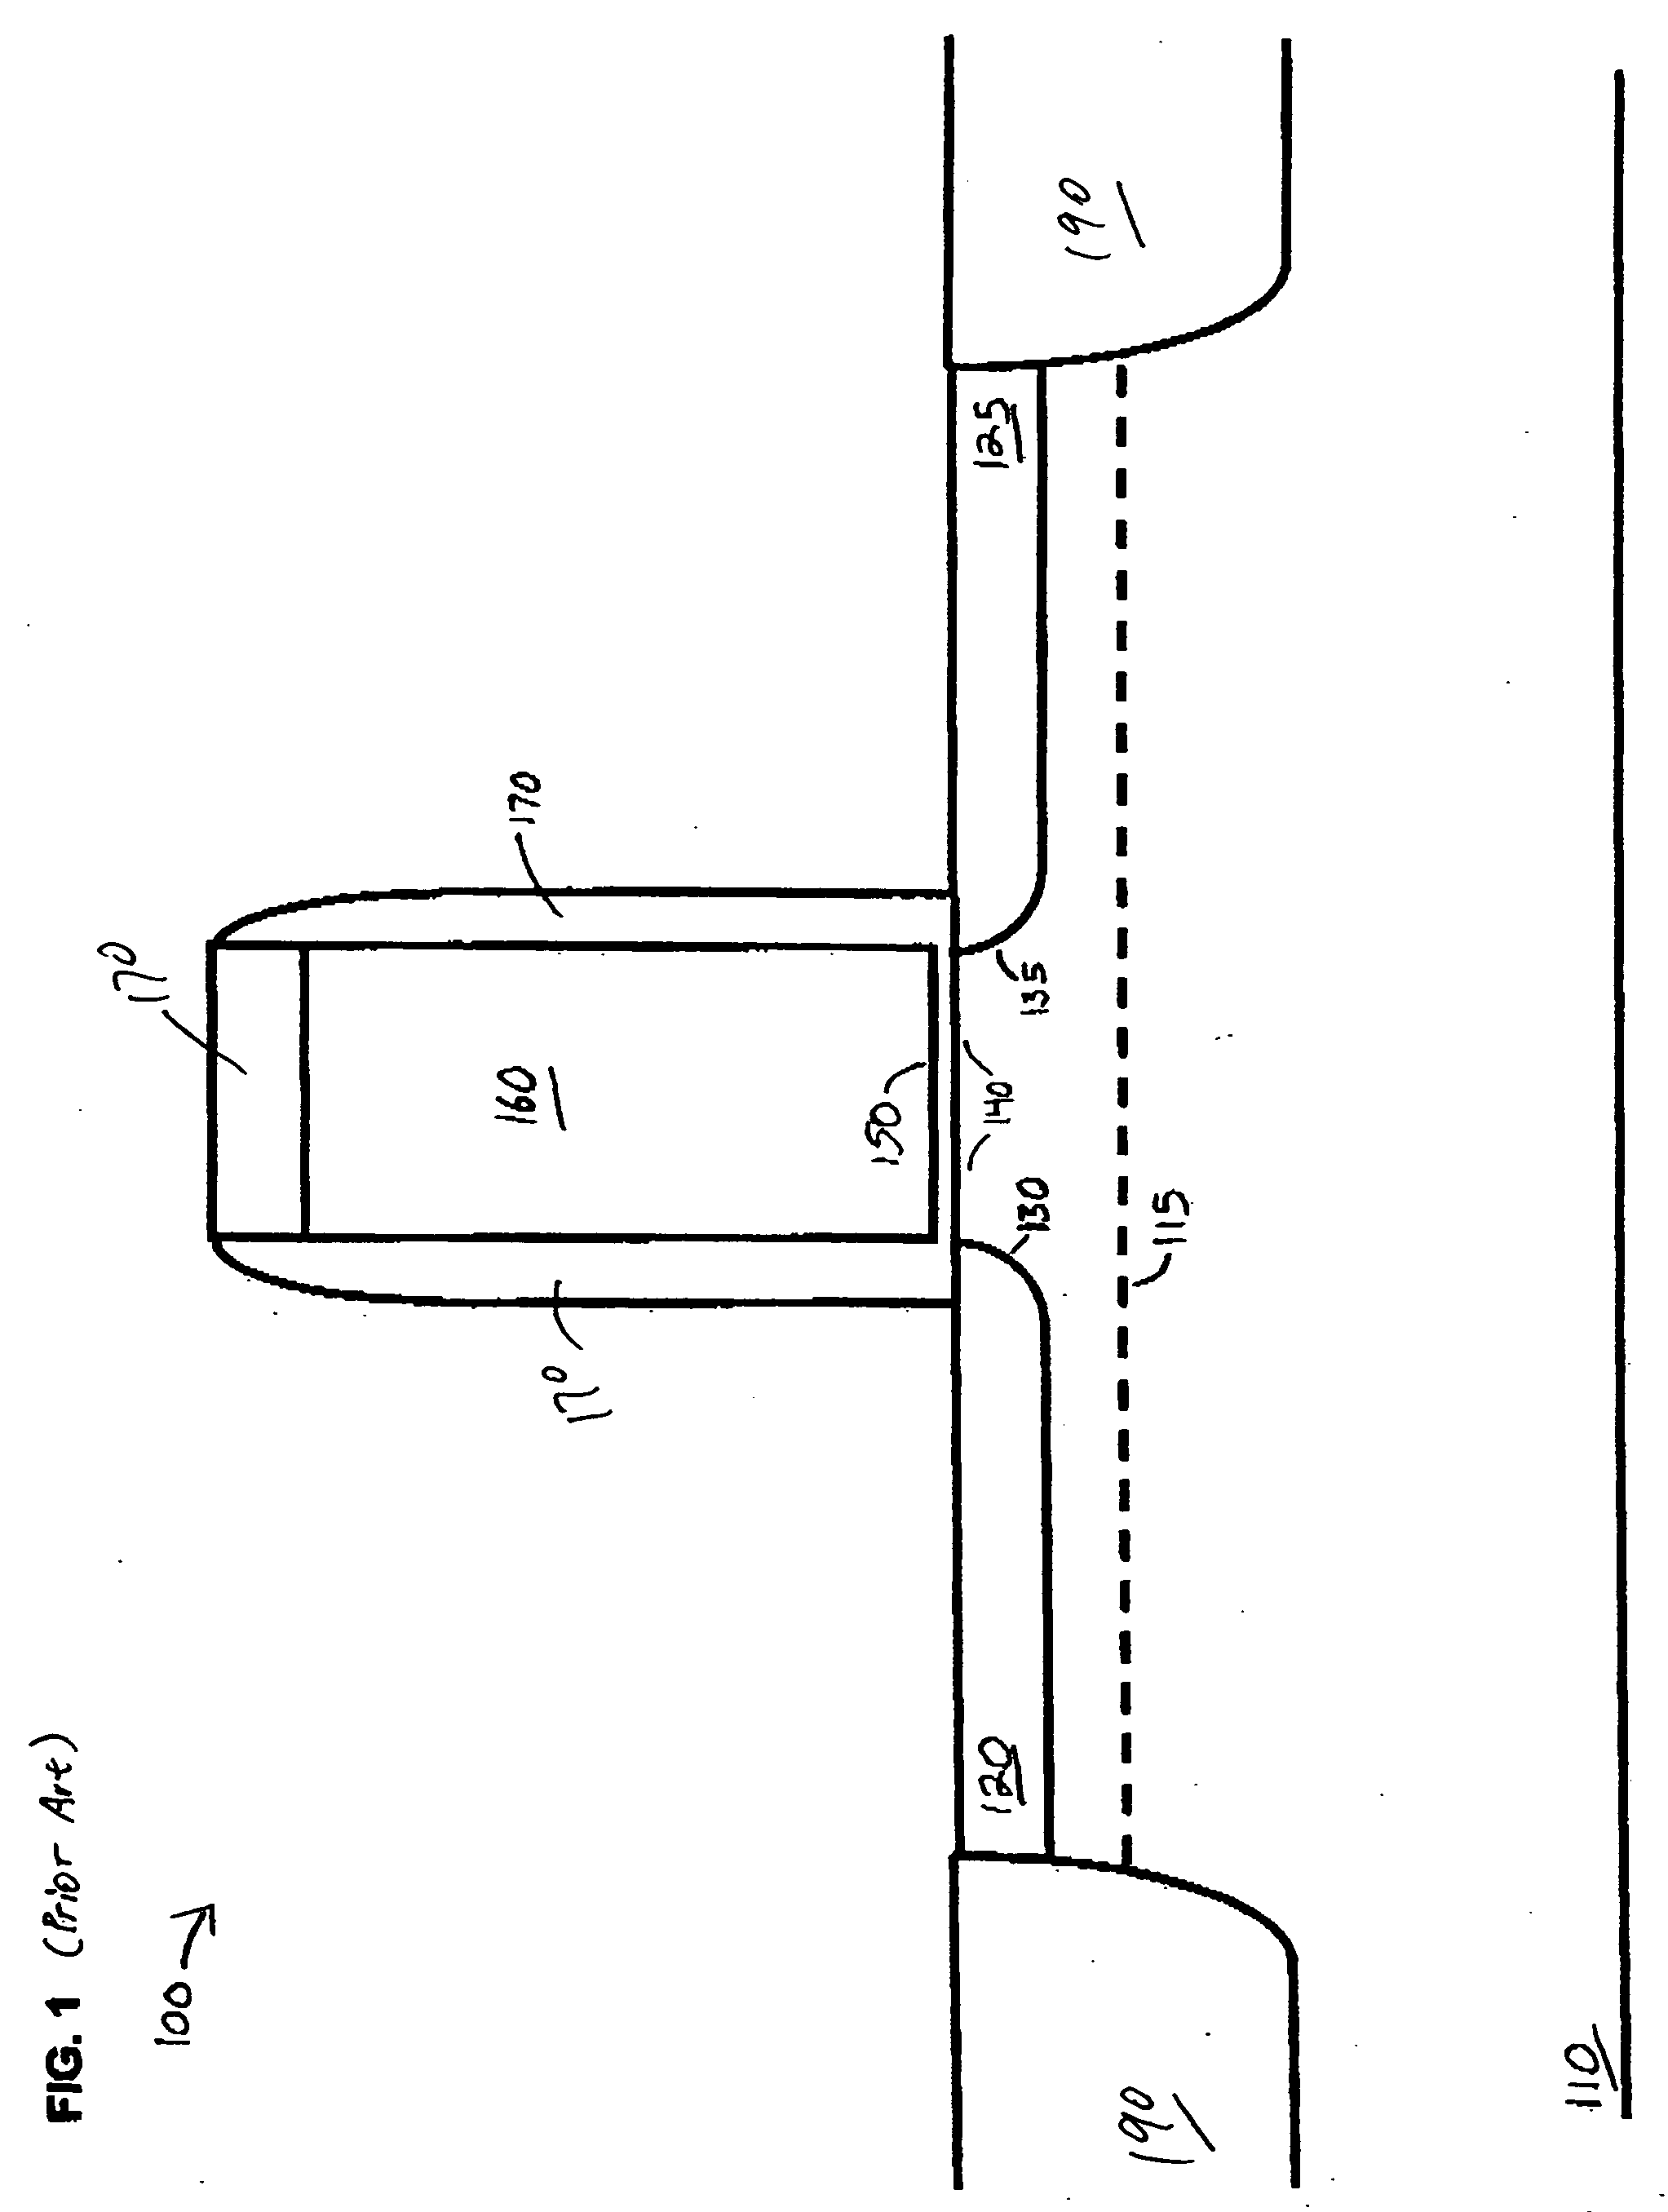 Dynamic schottky barrier MOSFET device and method of manufacture